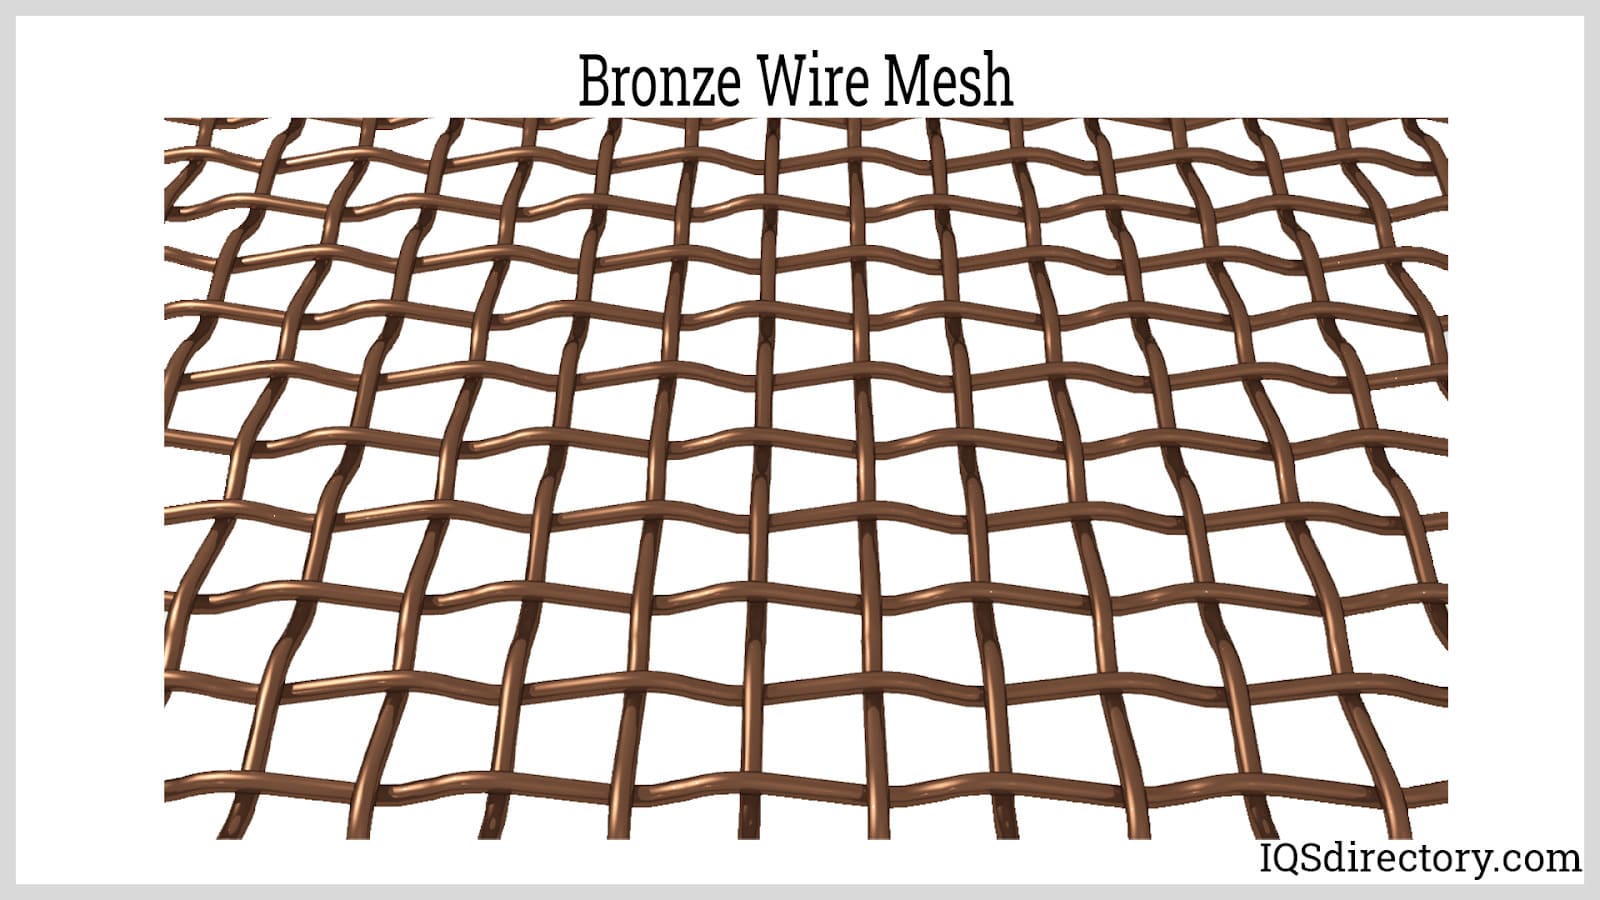 What is Woven Wire Cloth Used For?